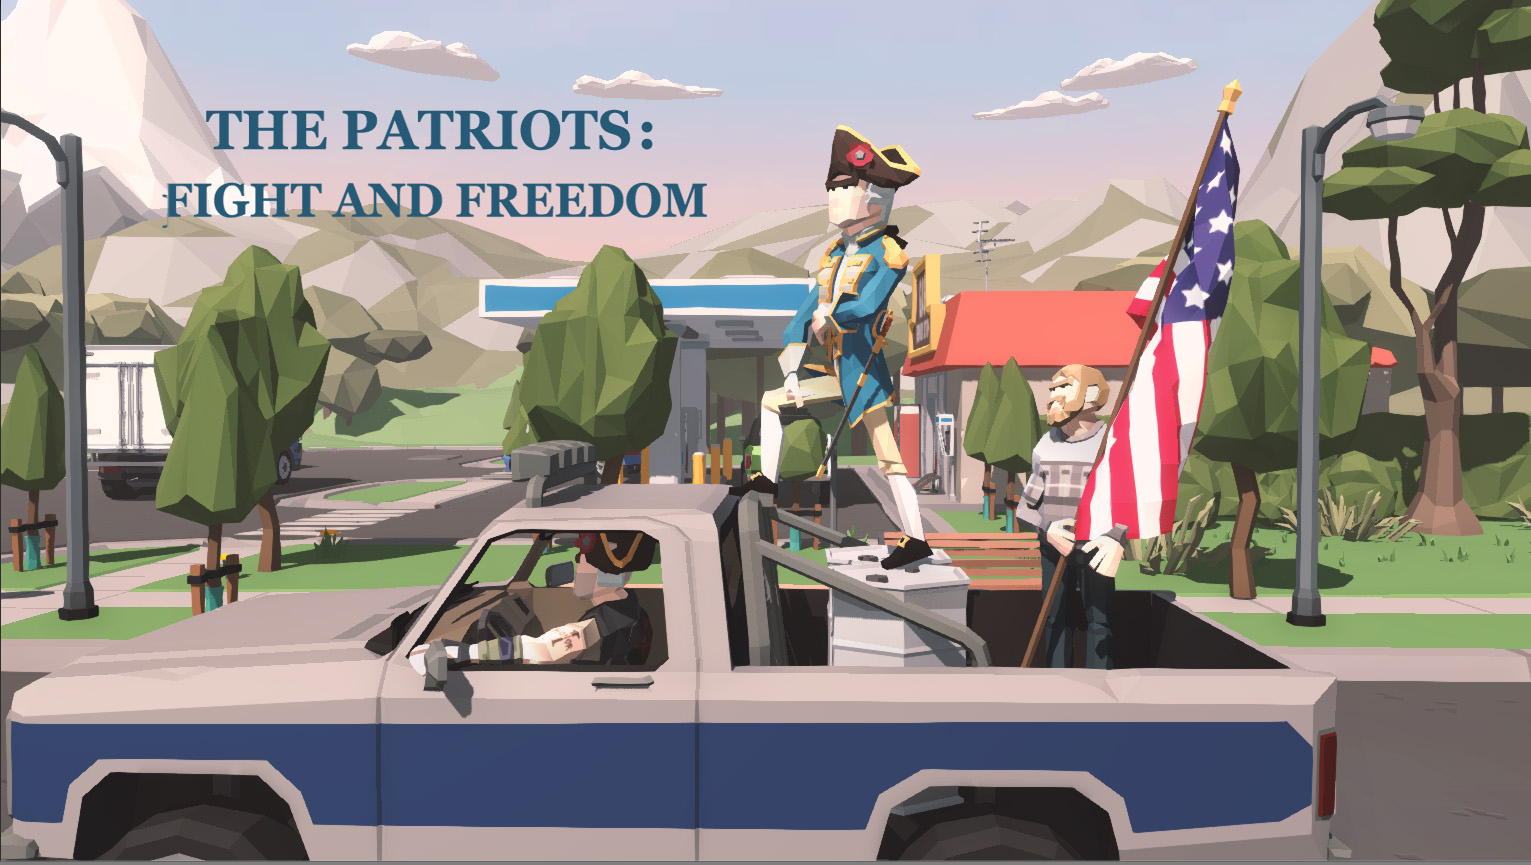 The Patriots: Fight and Freedom